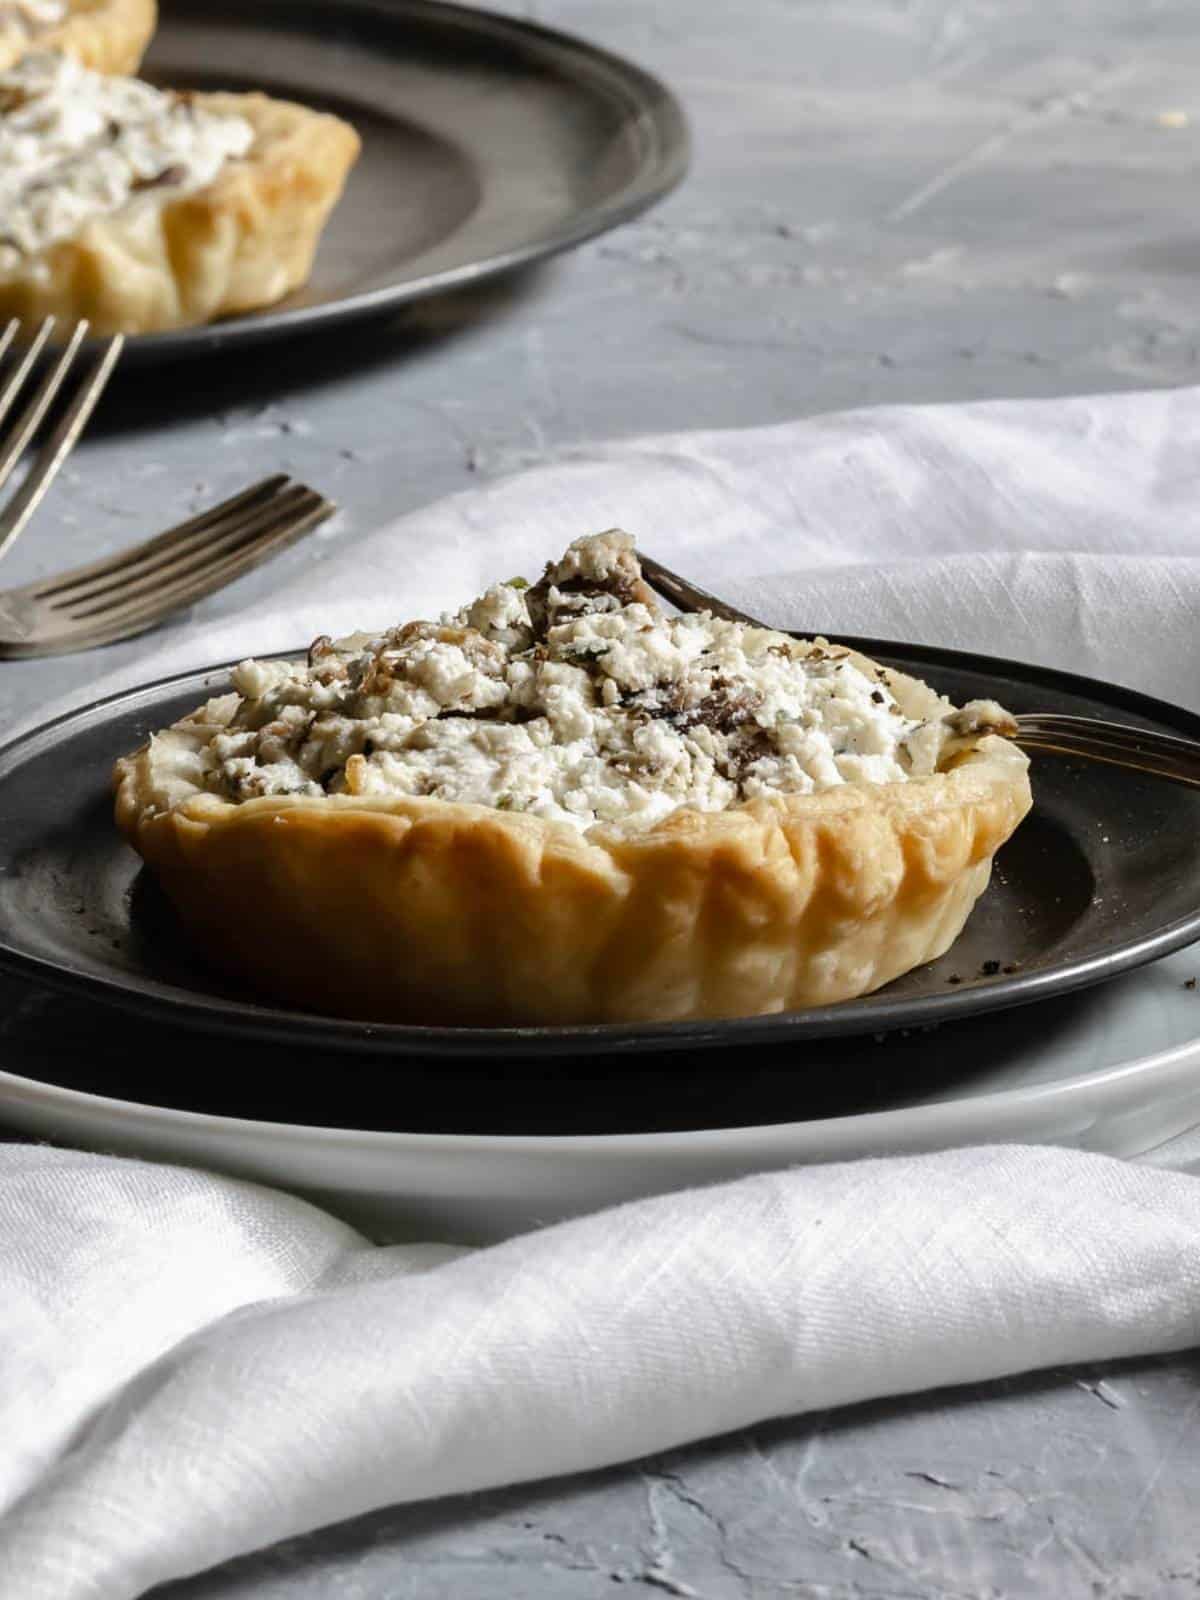 In-front-mini-puff-pastry-ricotta-and-mushrooms-truffle-on-a-plate-with-fork-on-the-bottom-plate-with-two-other-tartlets